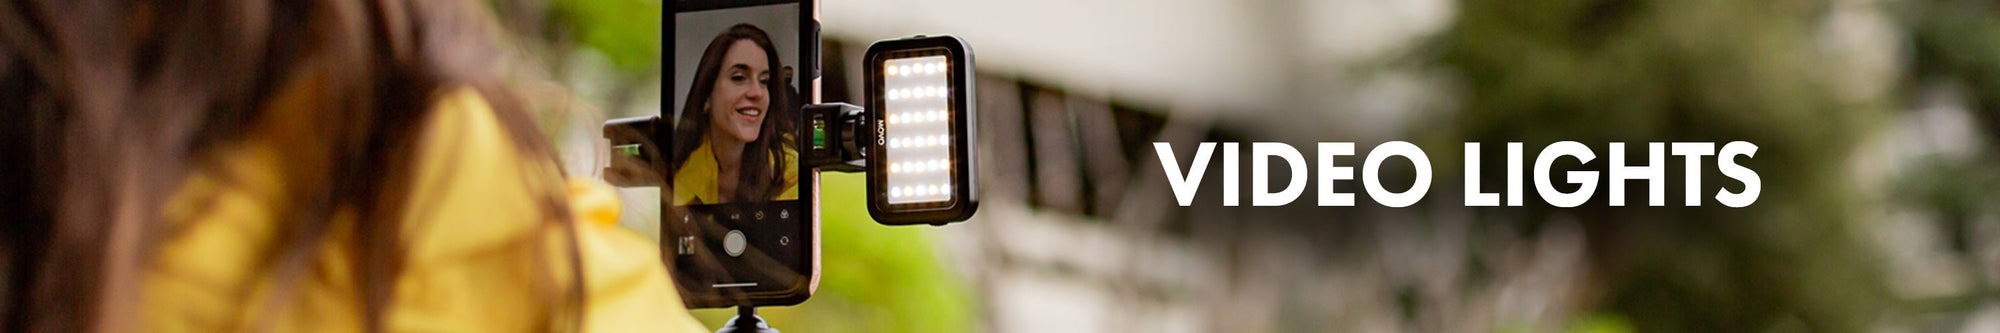 LED Video Lights for Cameras & More - Movo